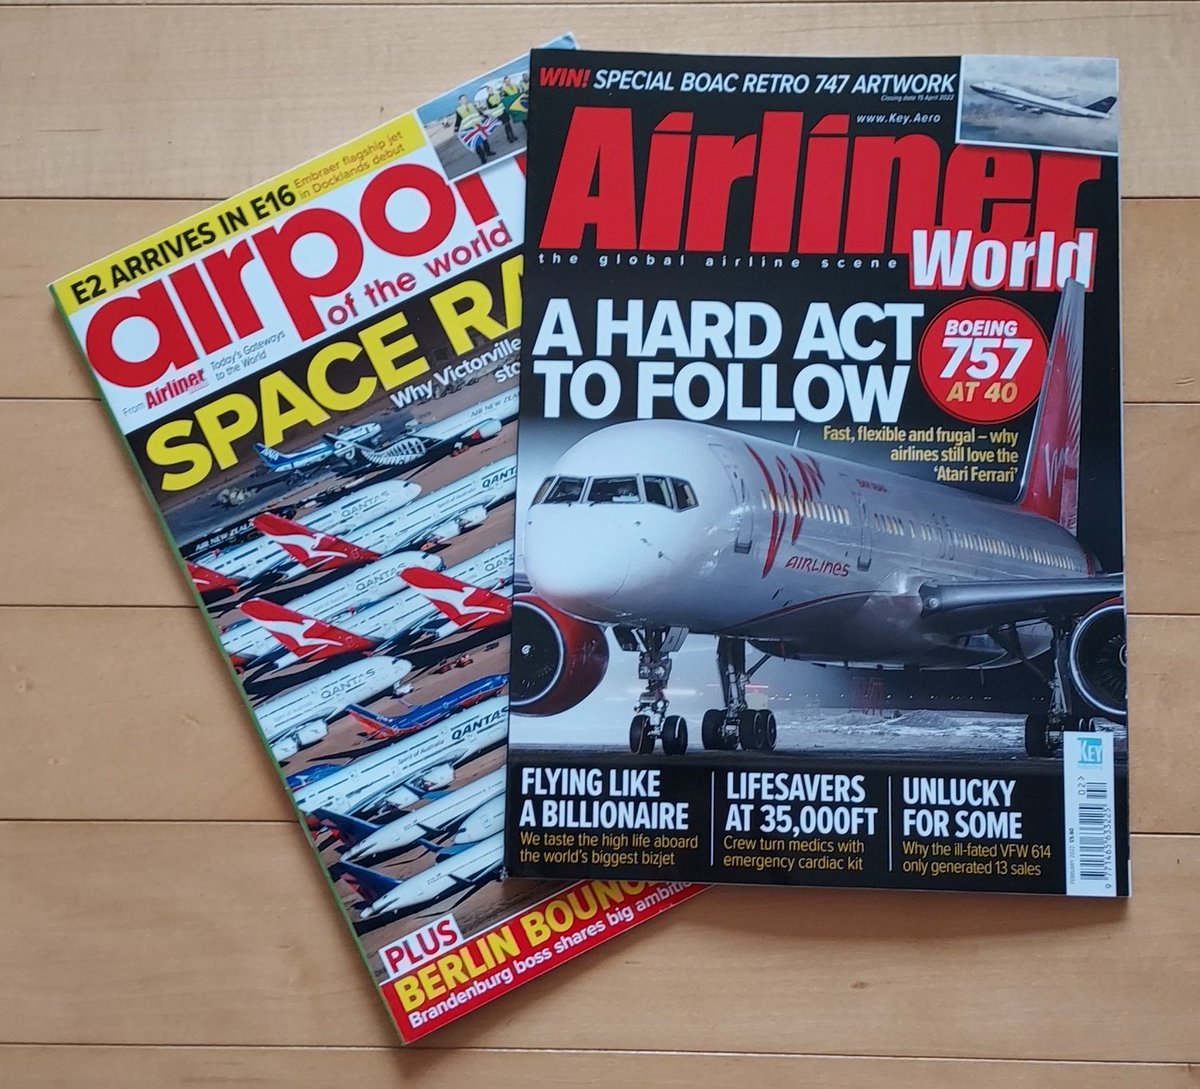 I'm sad to see @APOWmag disappear but I also understand the logic behind the move. The merge will make me love my @_AirlinerWorld even more! Keep up the good work. #avgeek #marriageofequals @KeyPublishing